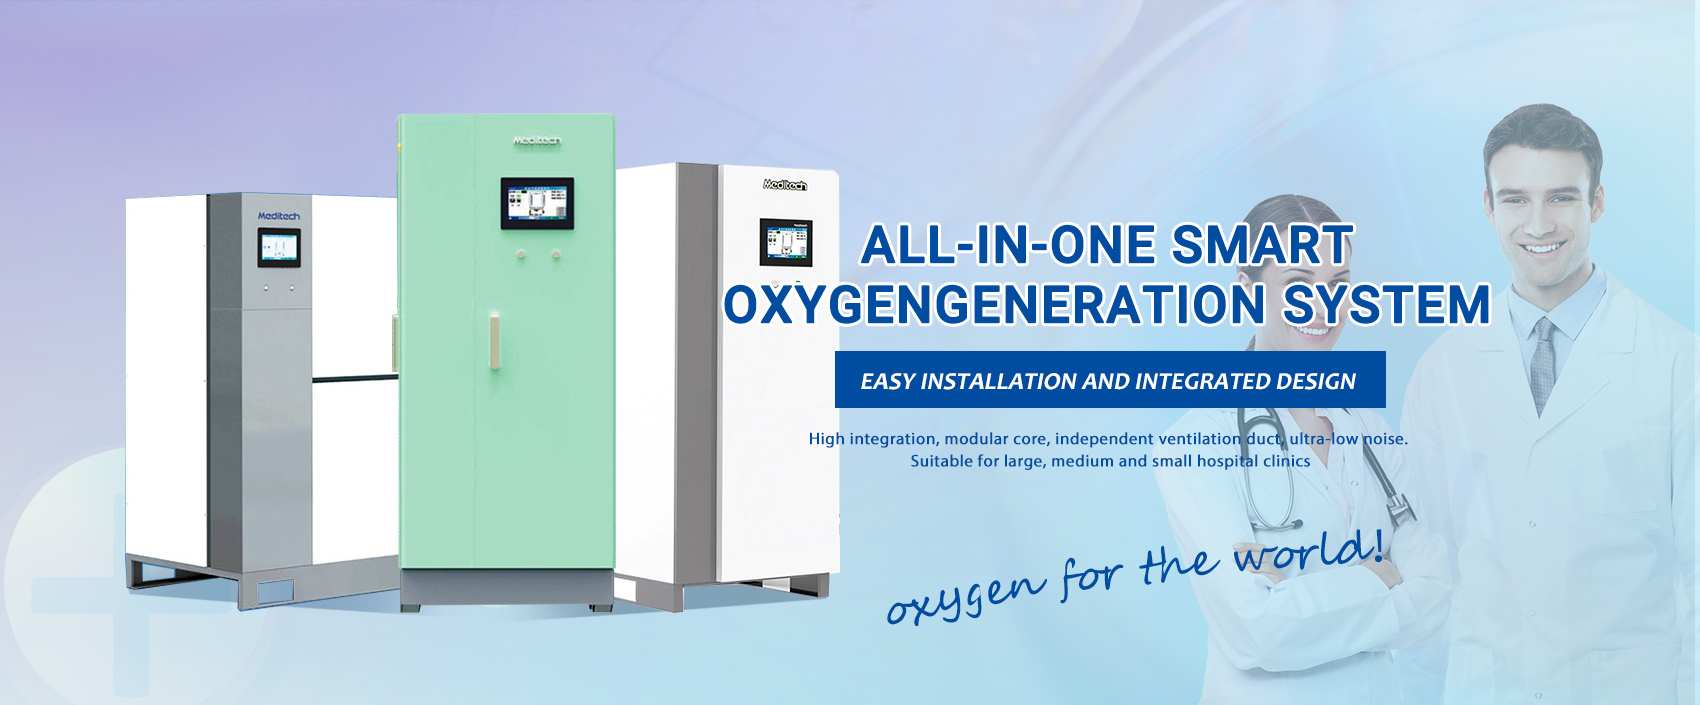 All-in-one Medical Systems Oxygen